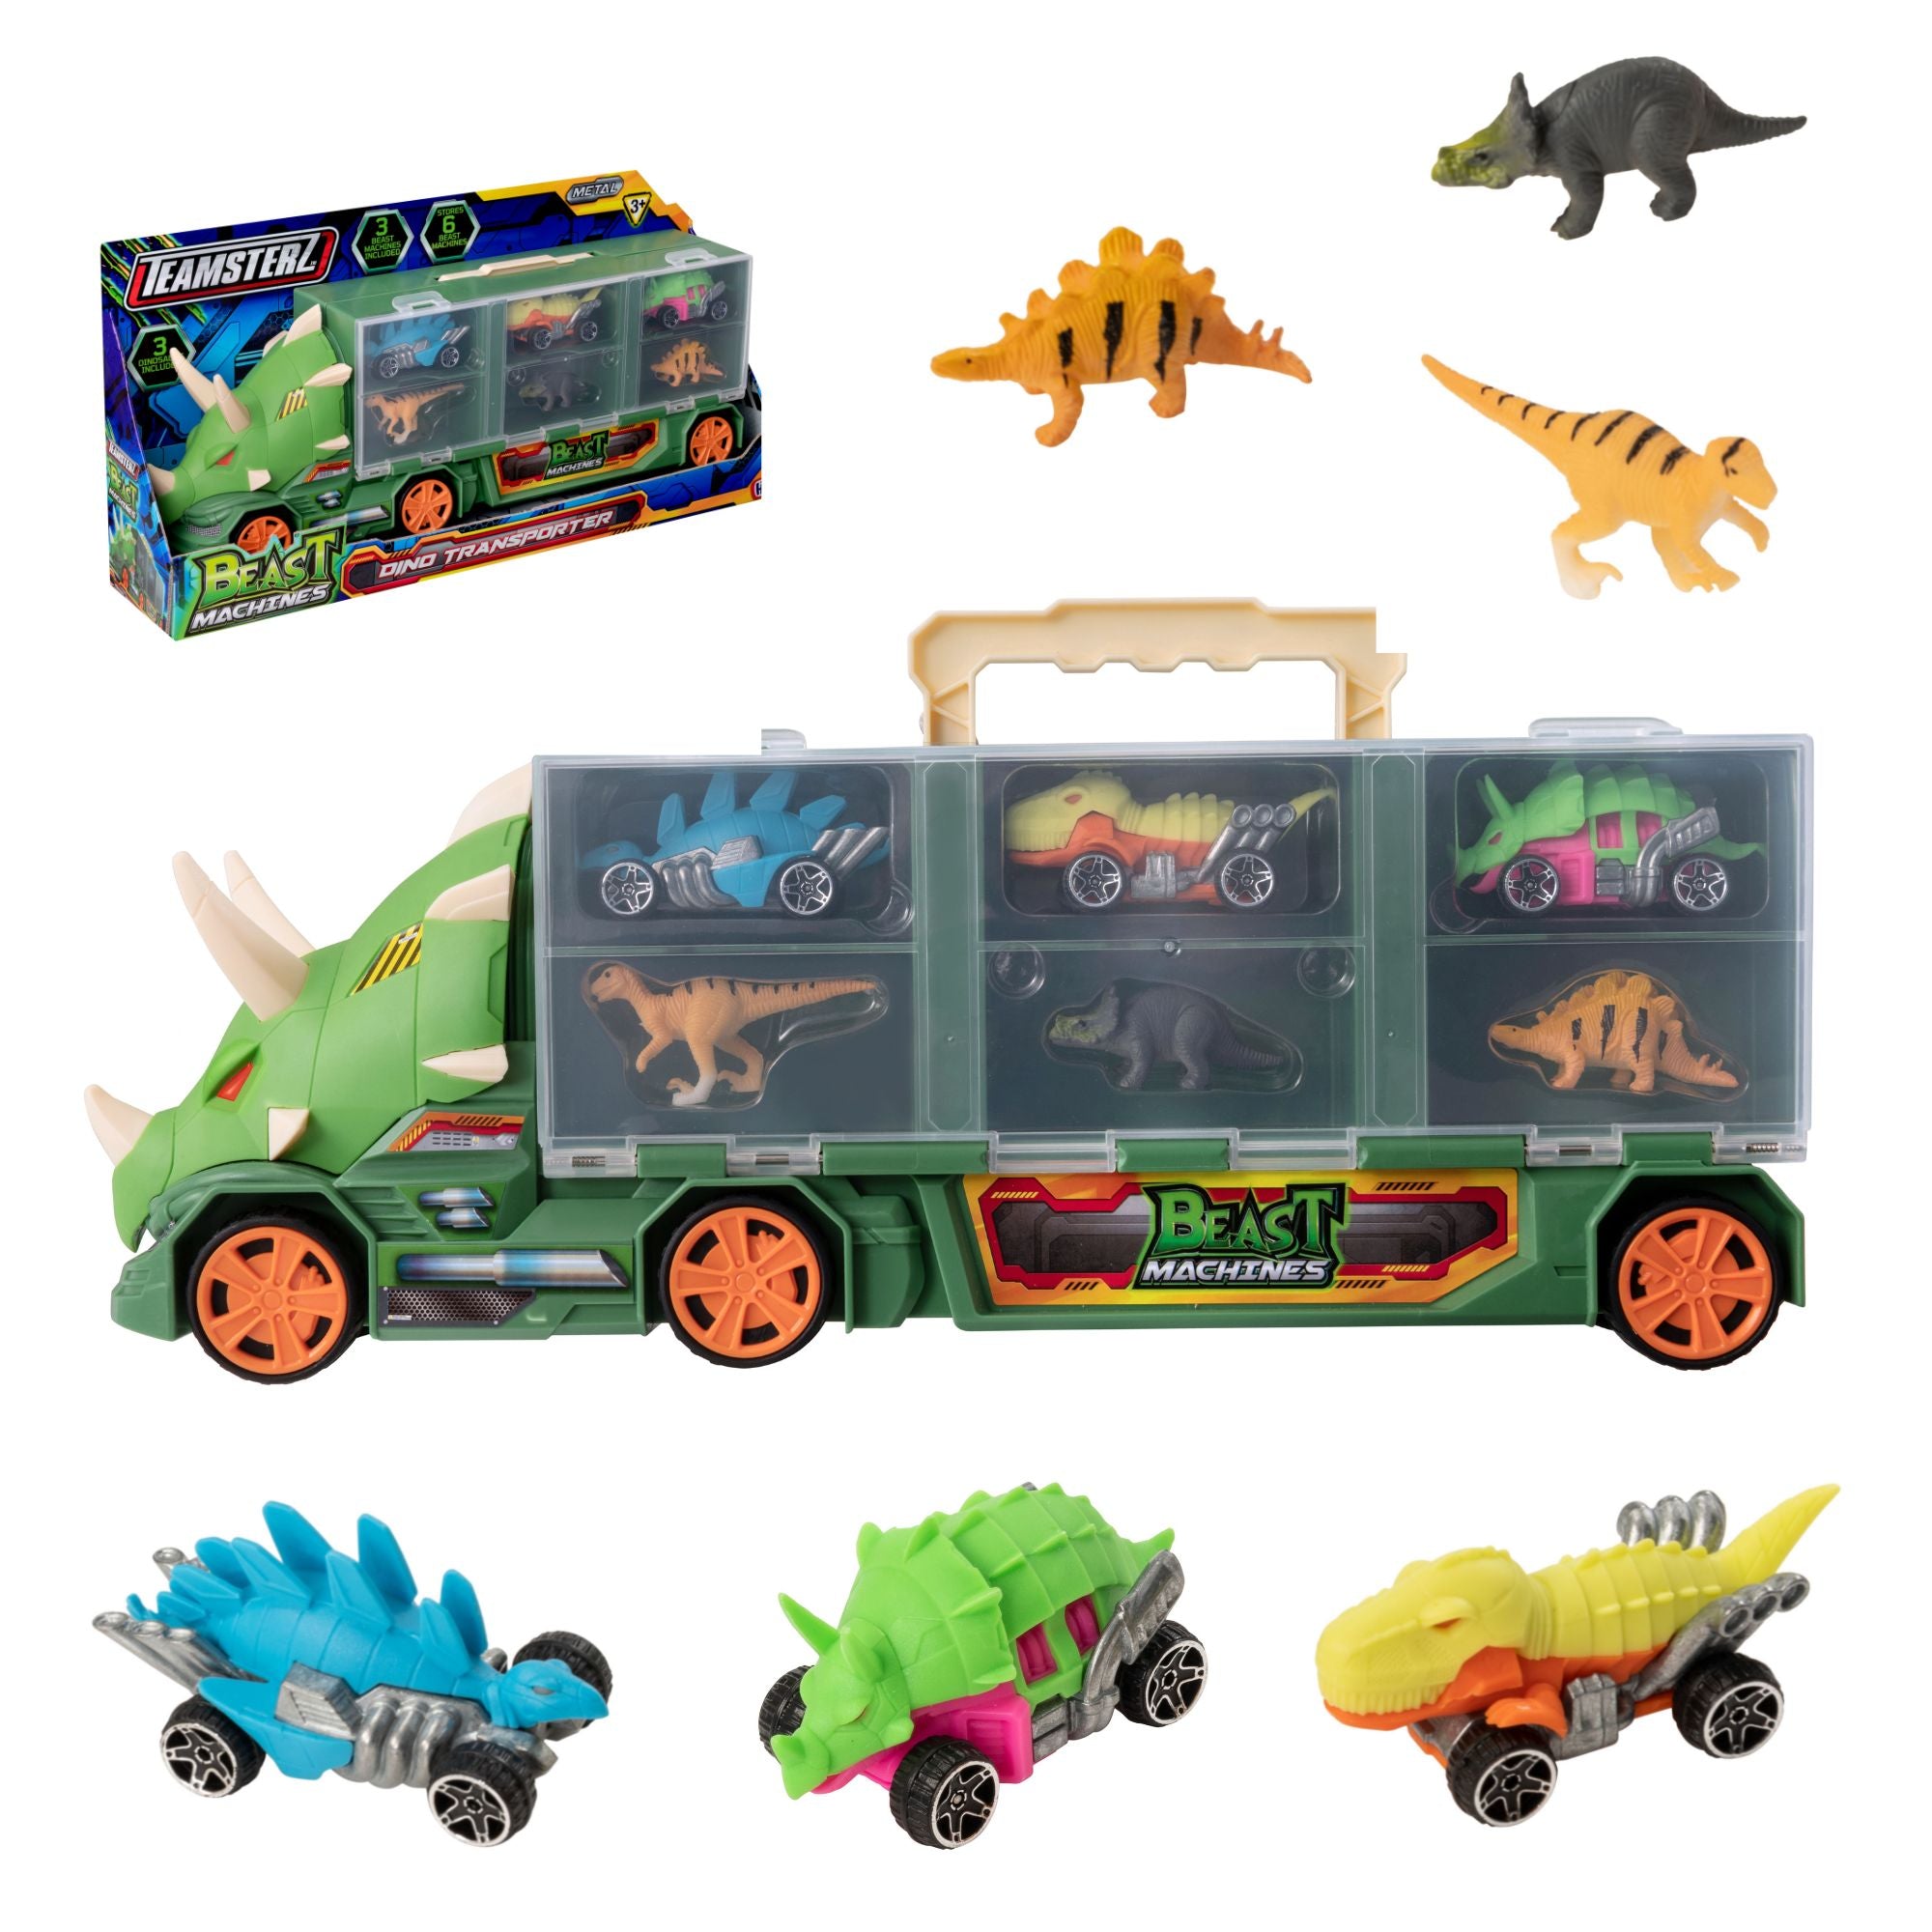 Baby Products Online - Baby Toy Electric Dinosaur Bubble Machine